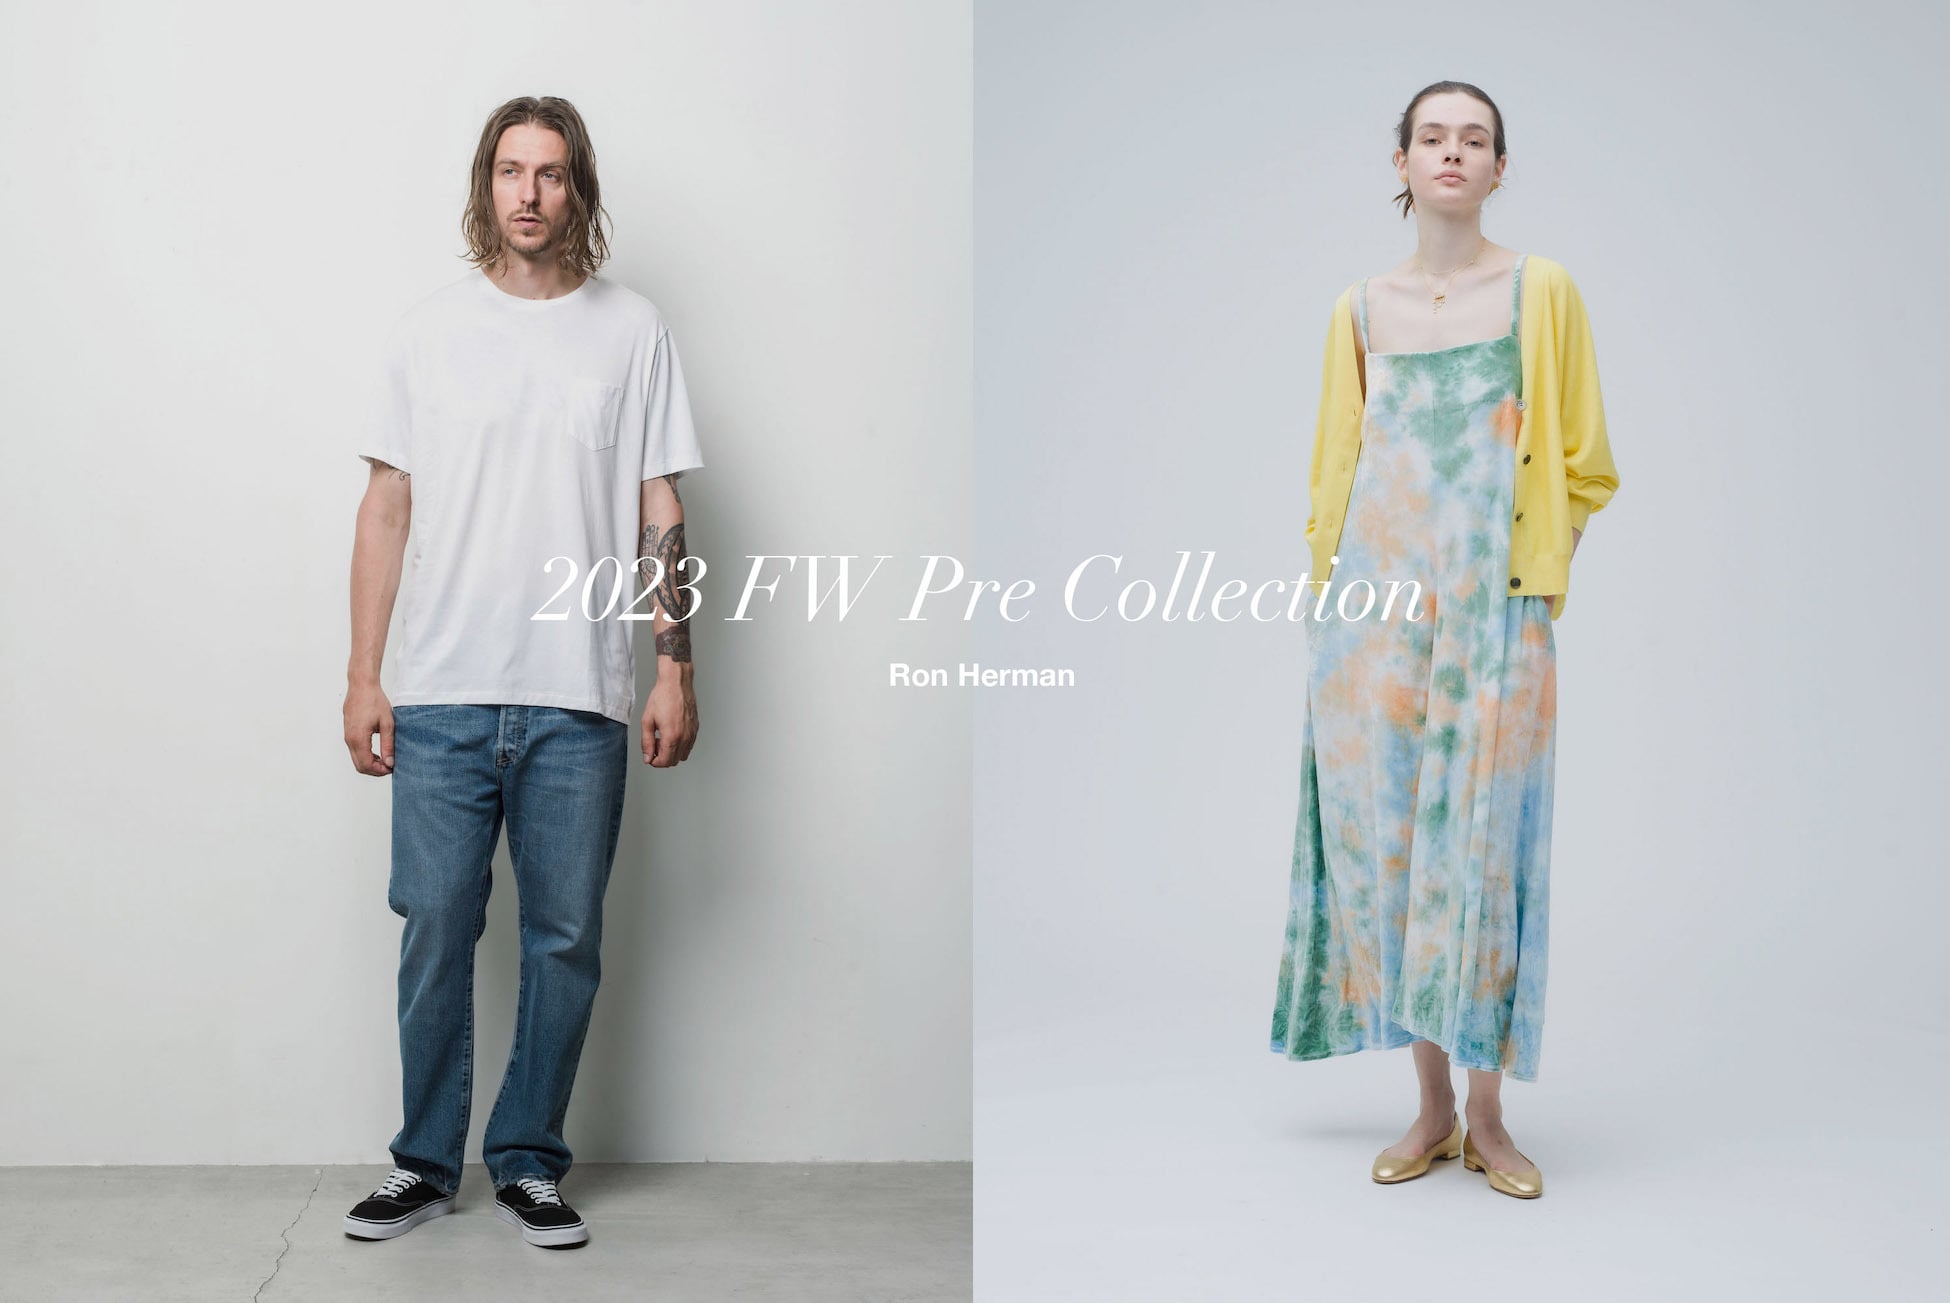 2023 FW Pre Collection News｜Ron Herman